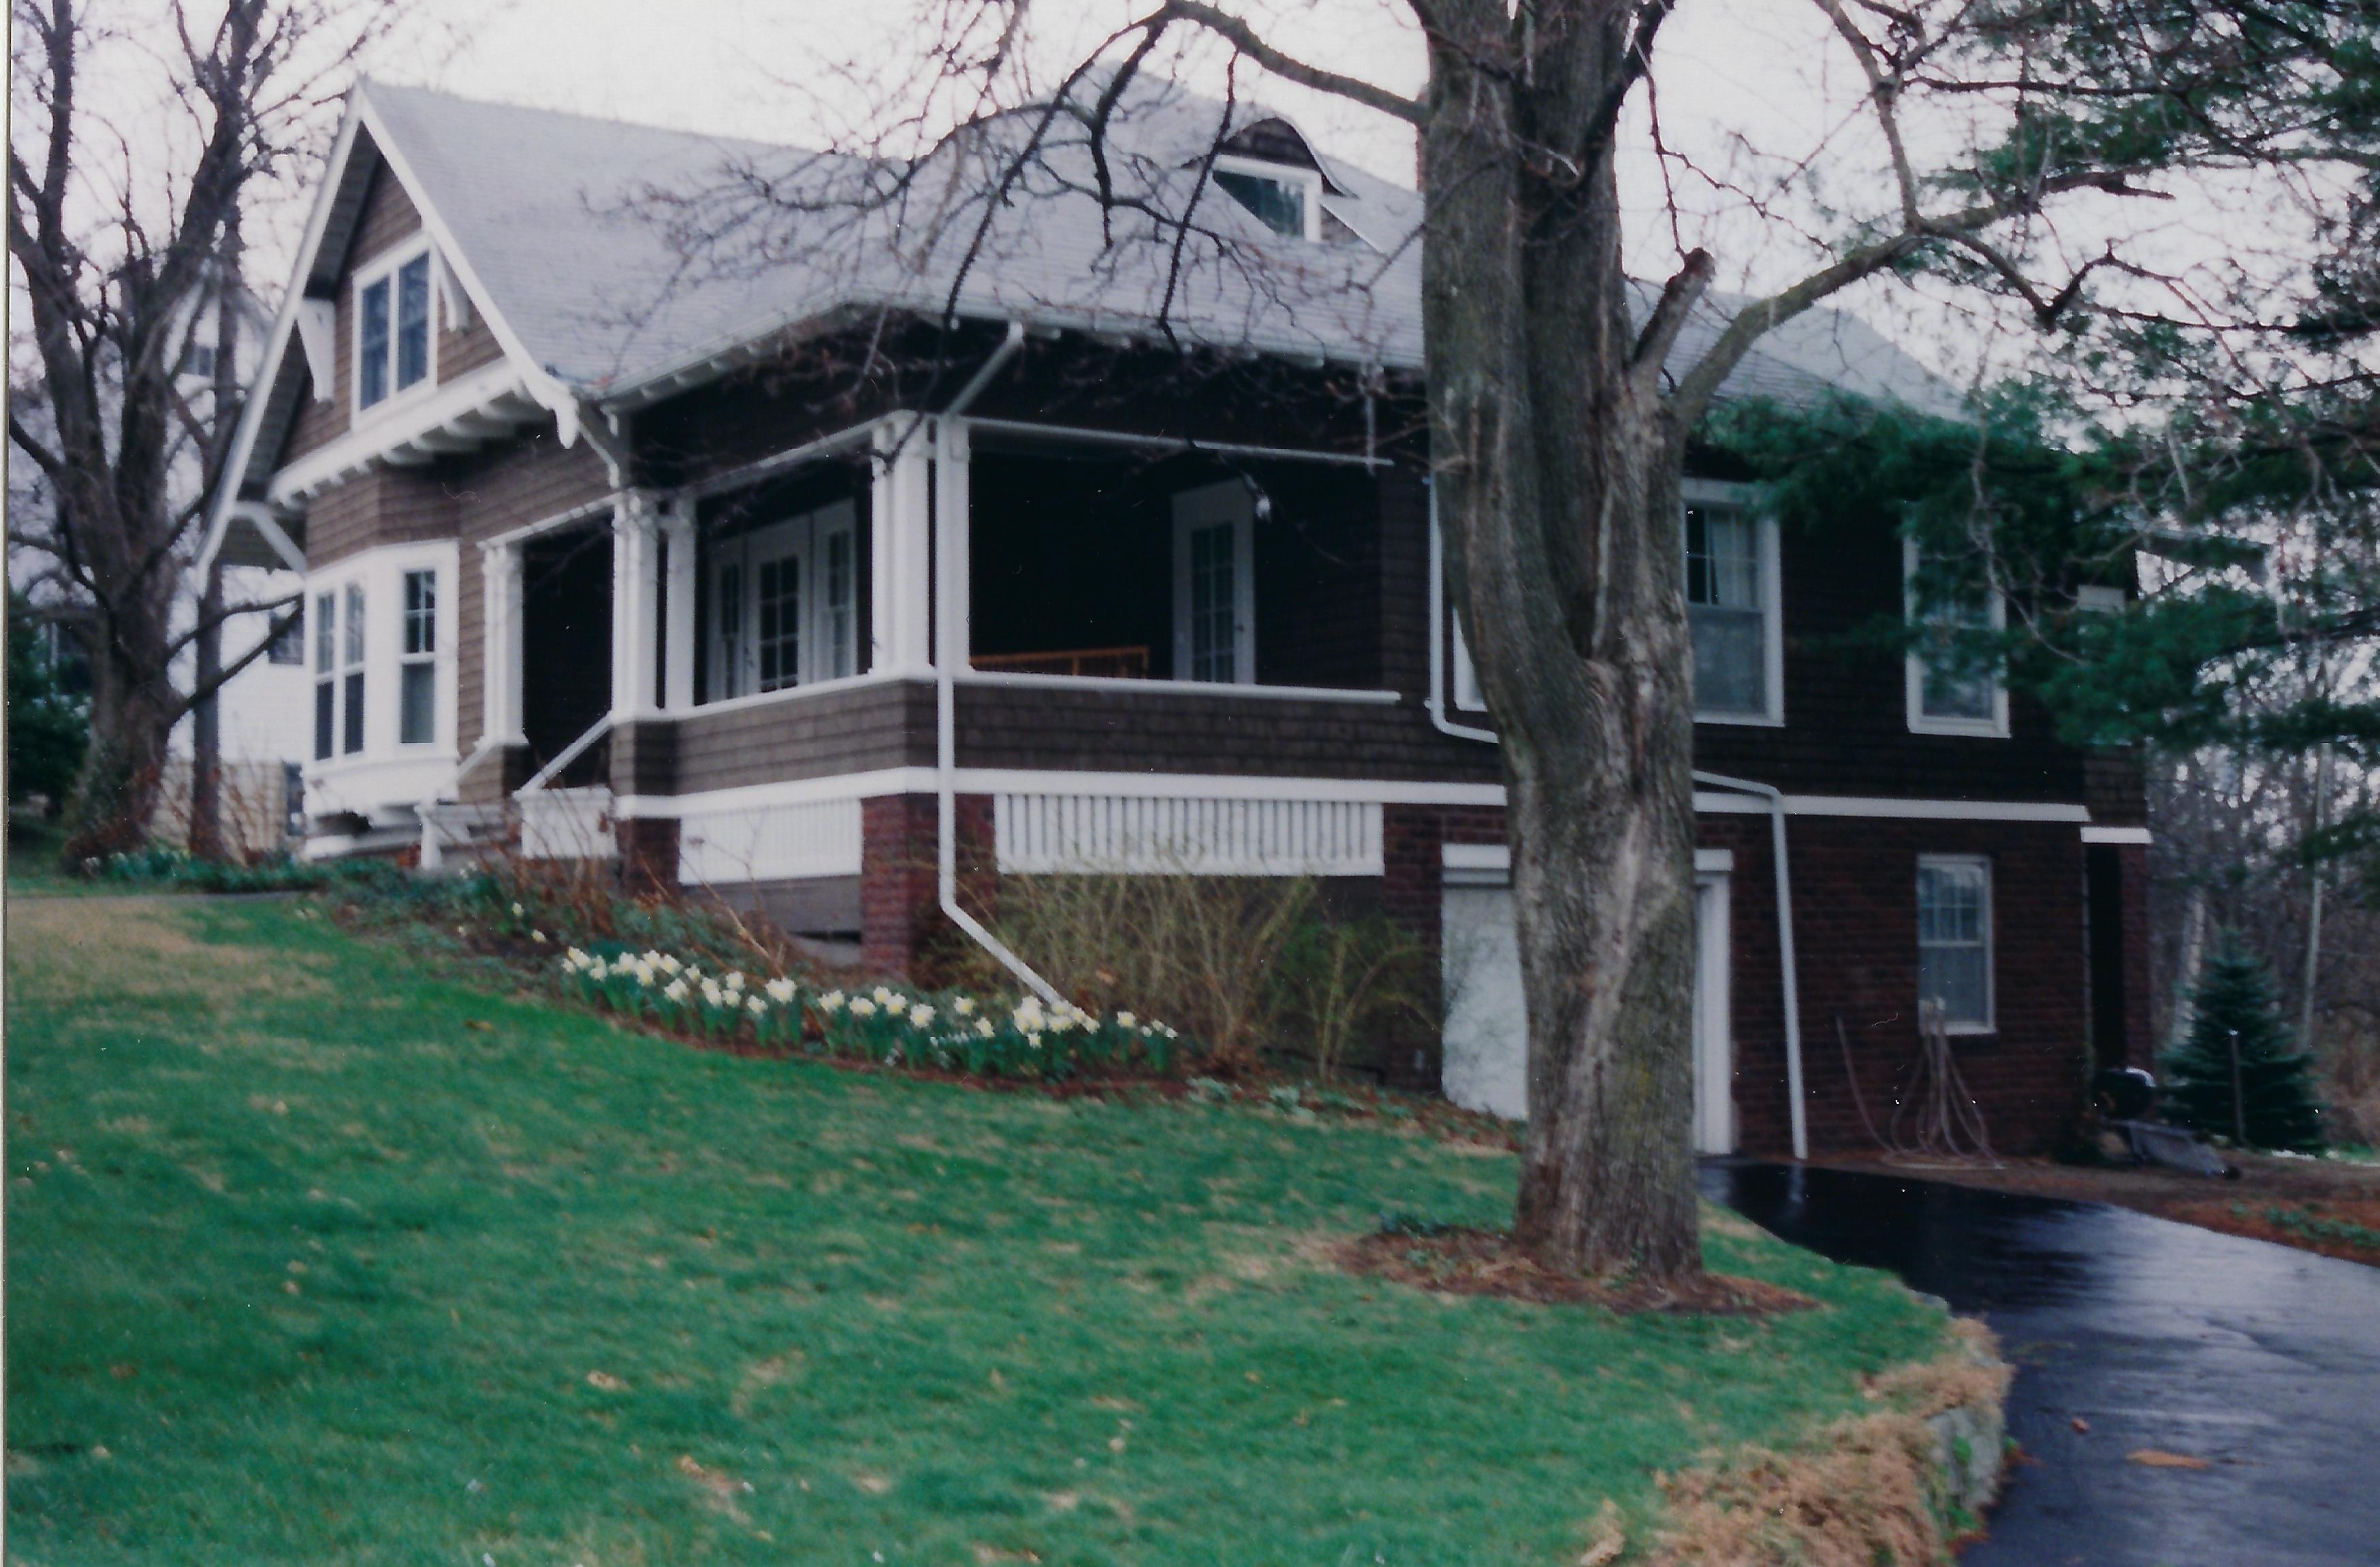 Photo of 906 Summit Avenue in April